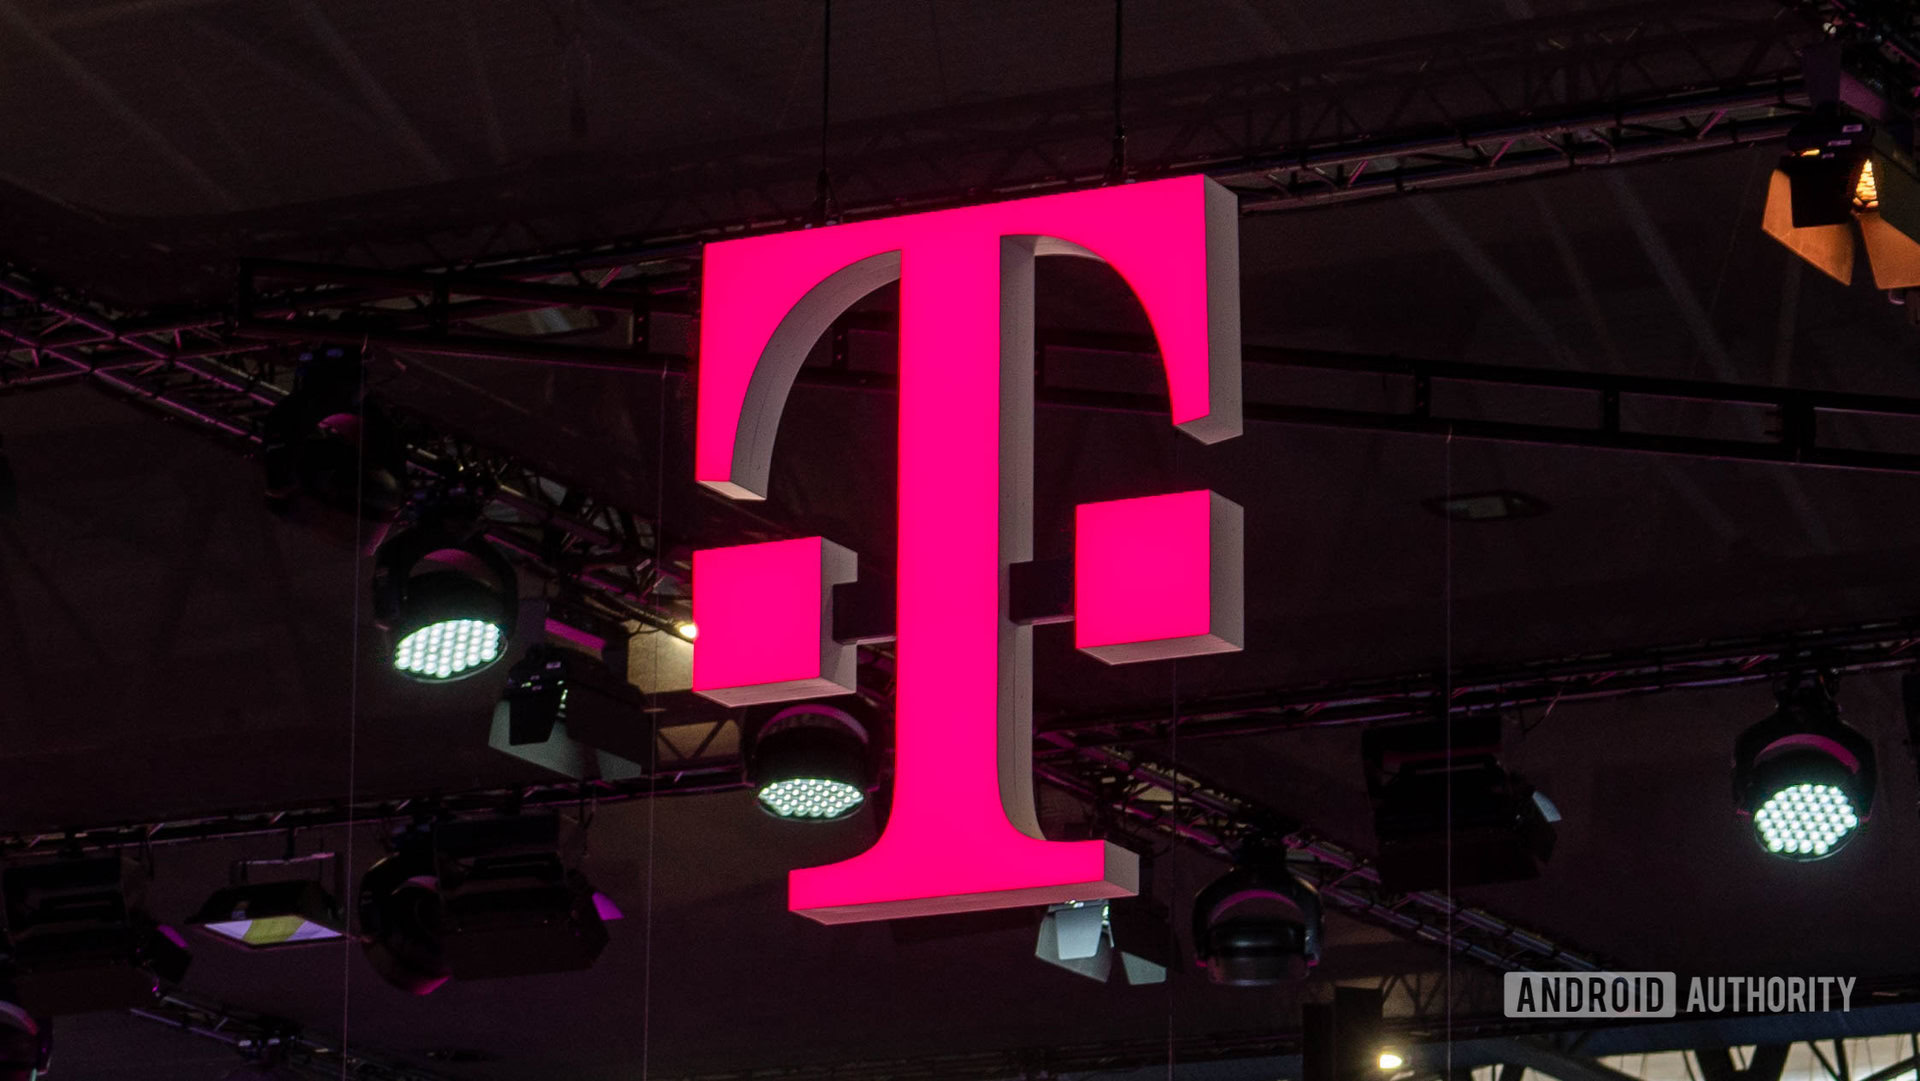 T-mobile in the background, its official logo